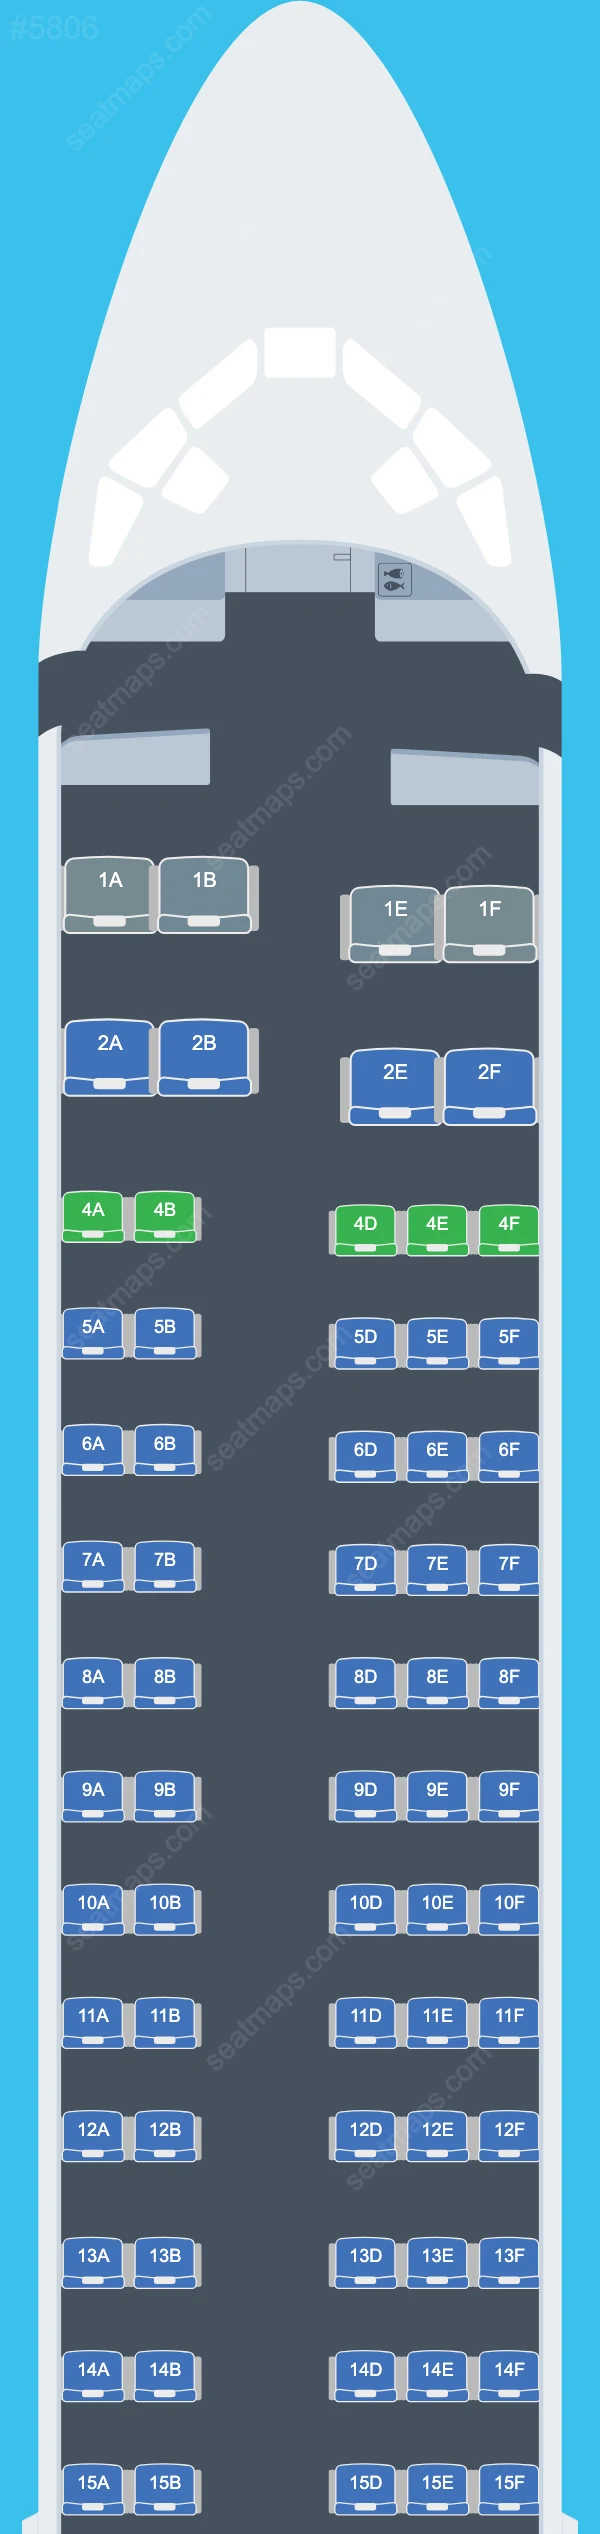 Hawaiian Airlines Boeing 717-200 seatmap mobile preview